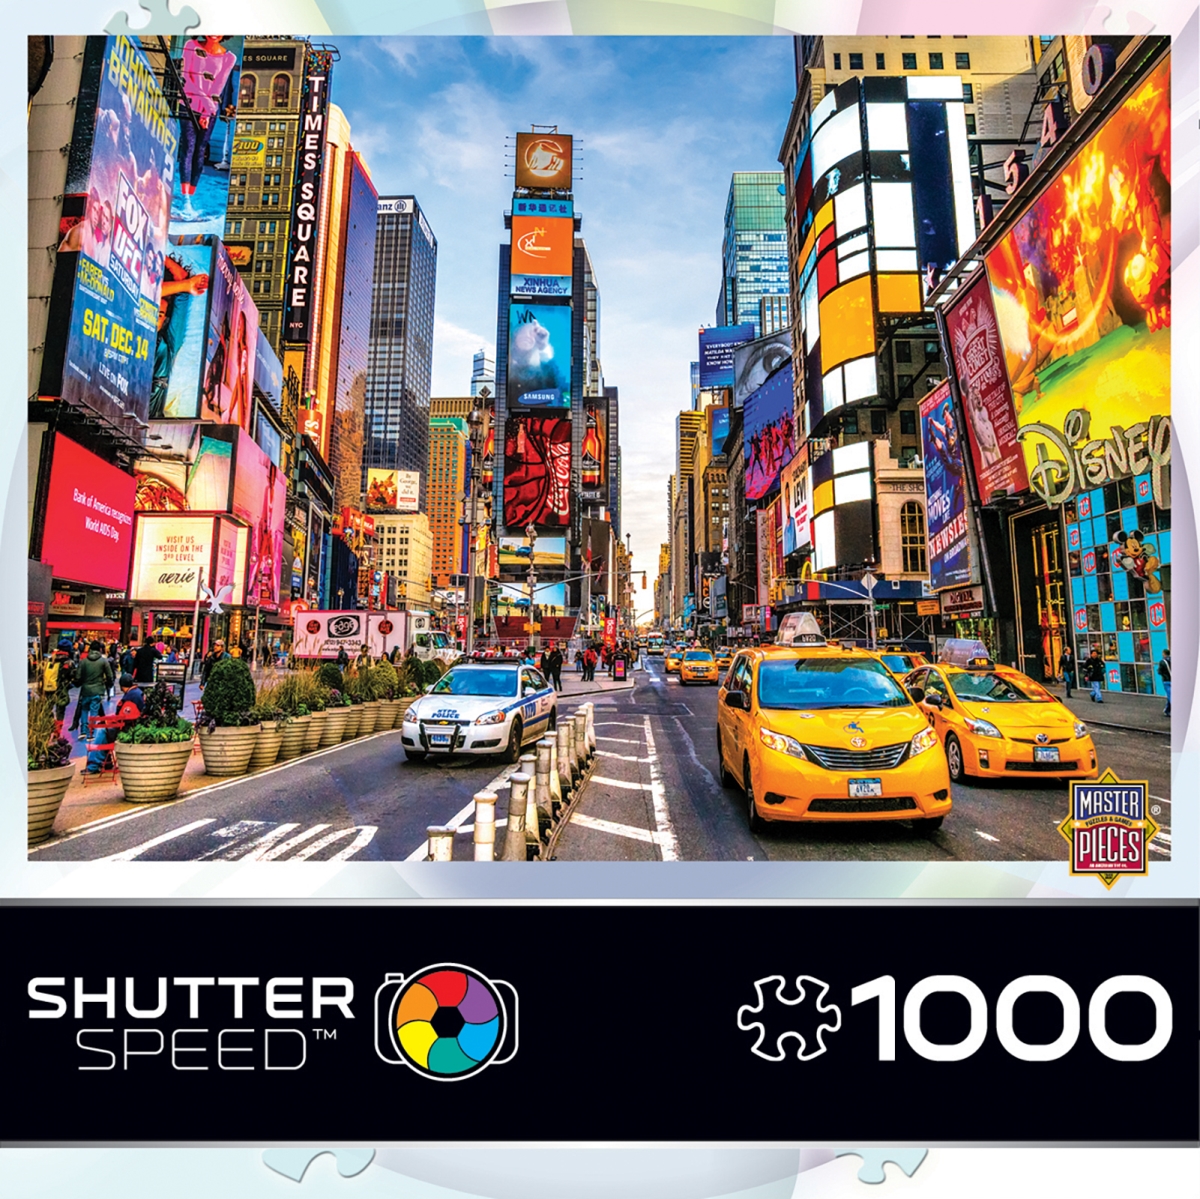 71607 19.25 X 26.75 In. Shutterspeed Times Square Jigsaw Puzzle - 1000 Piece